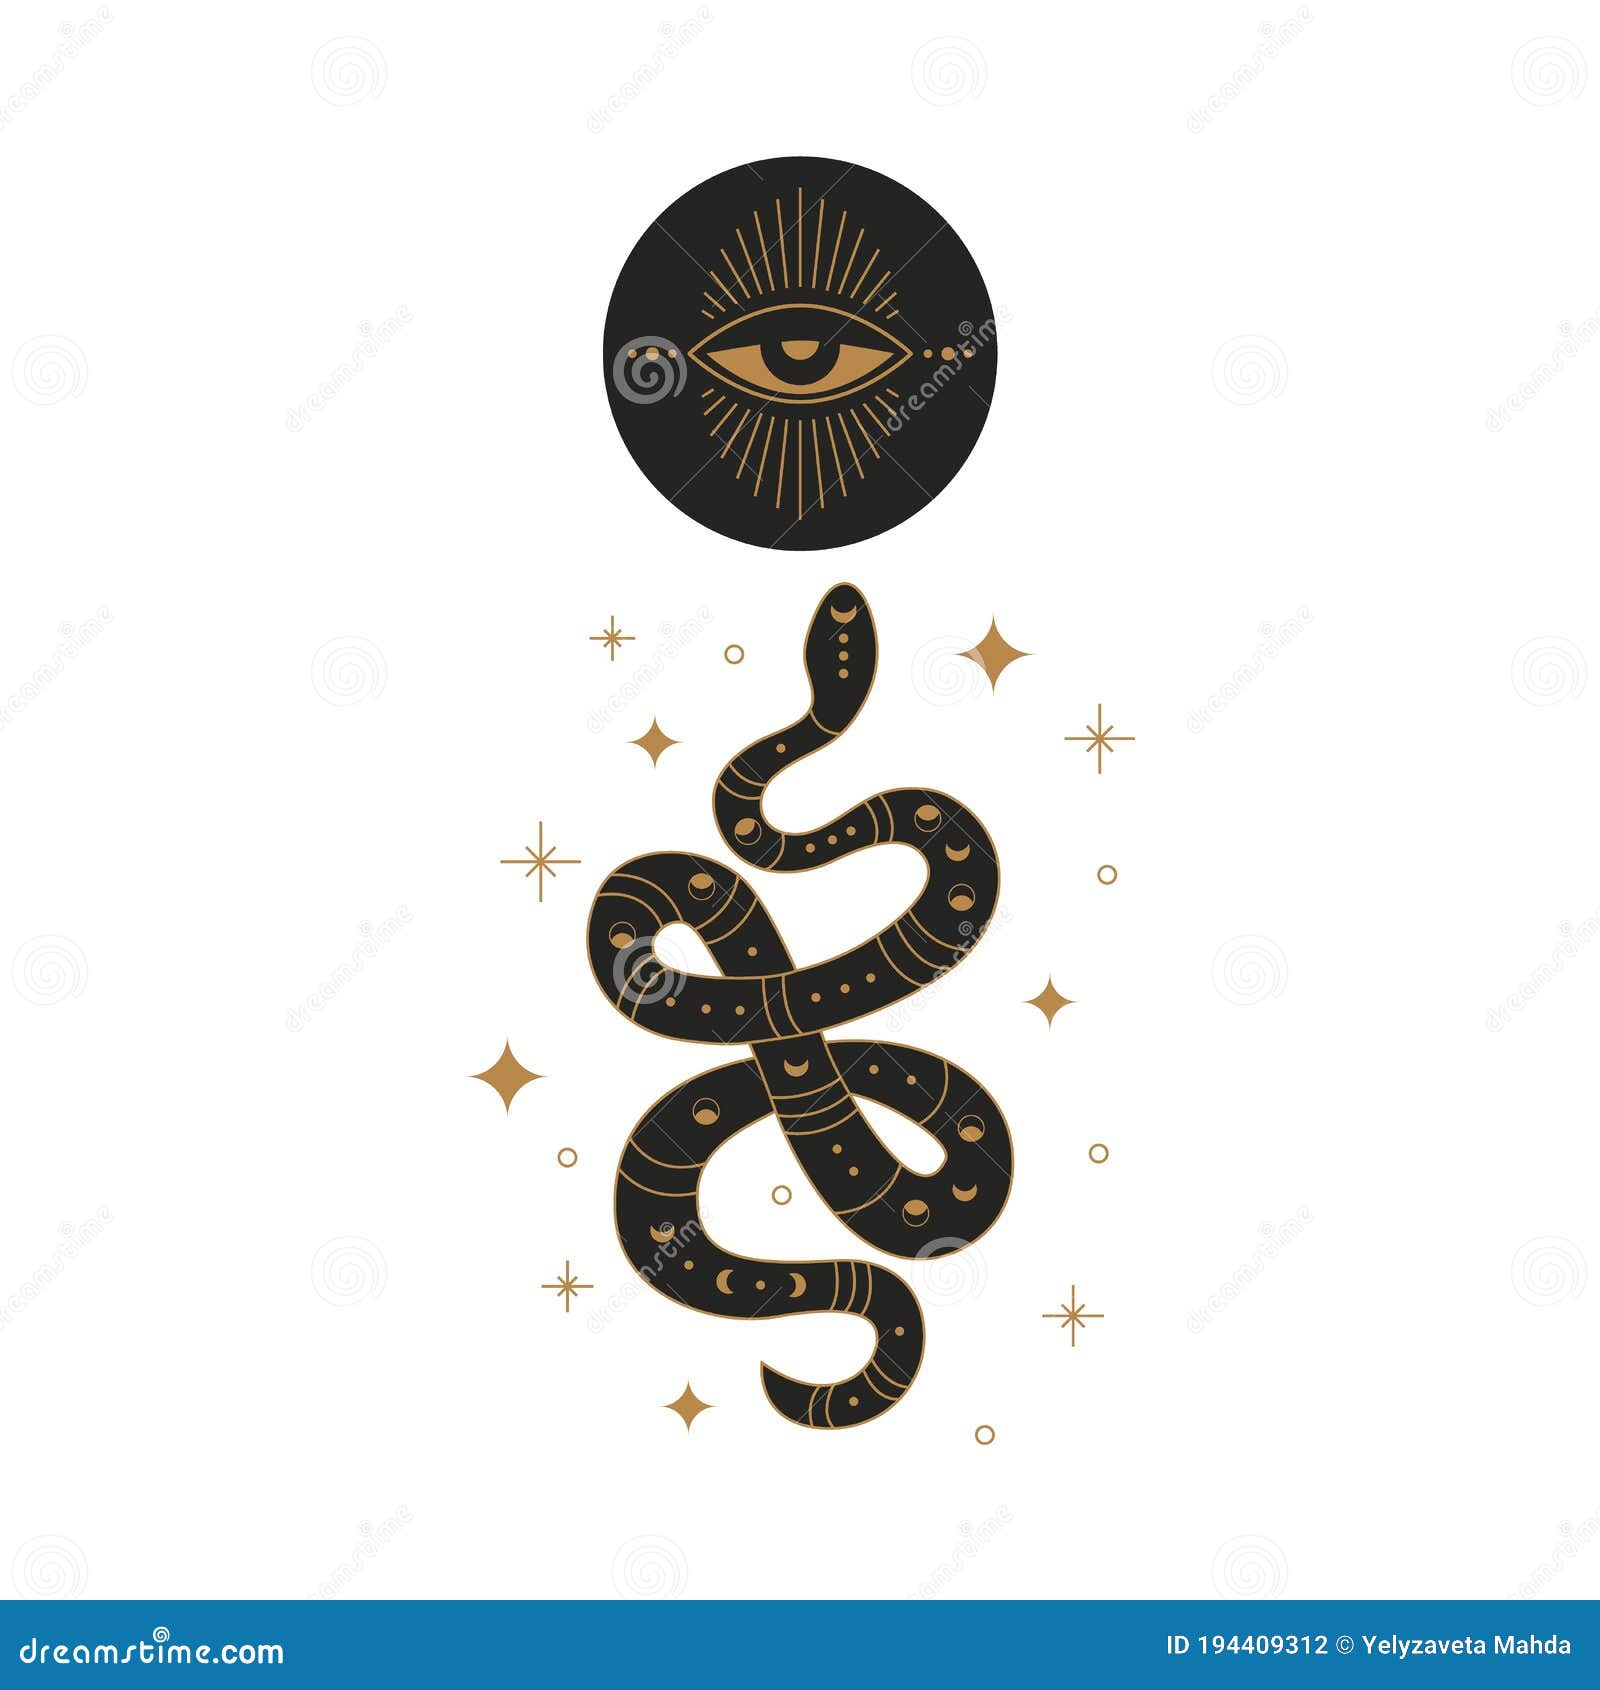 boho mystic snake . abstract hand drawn esoteric serpent icon with moon eye, occult tattoo egypt style.  